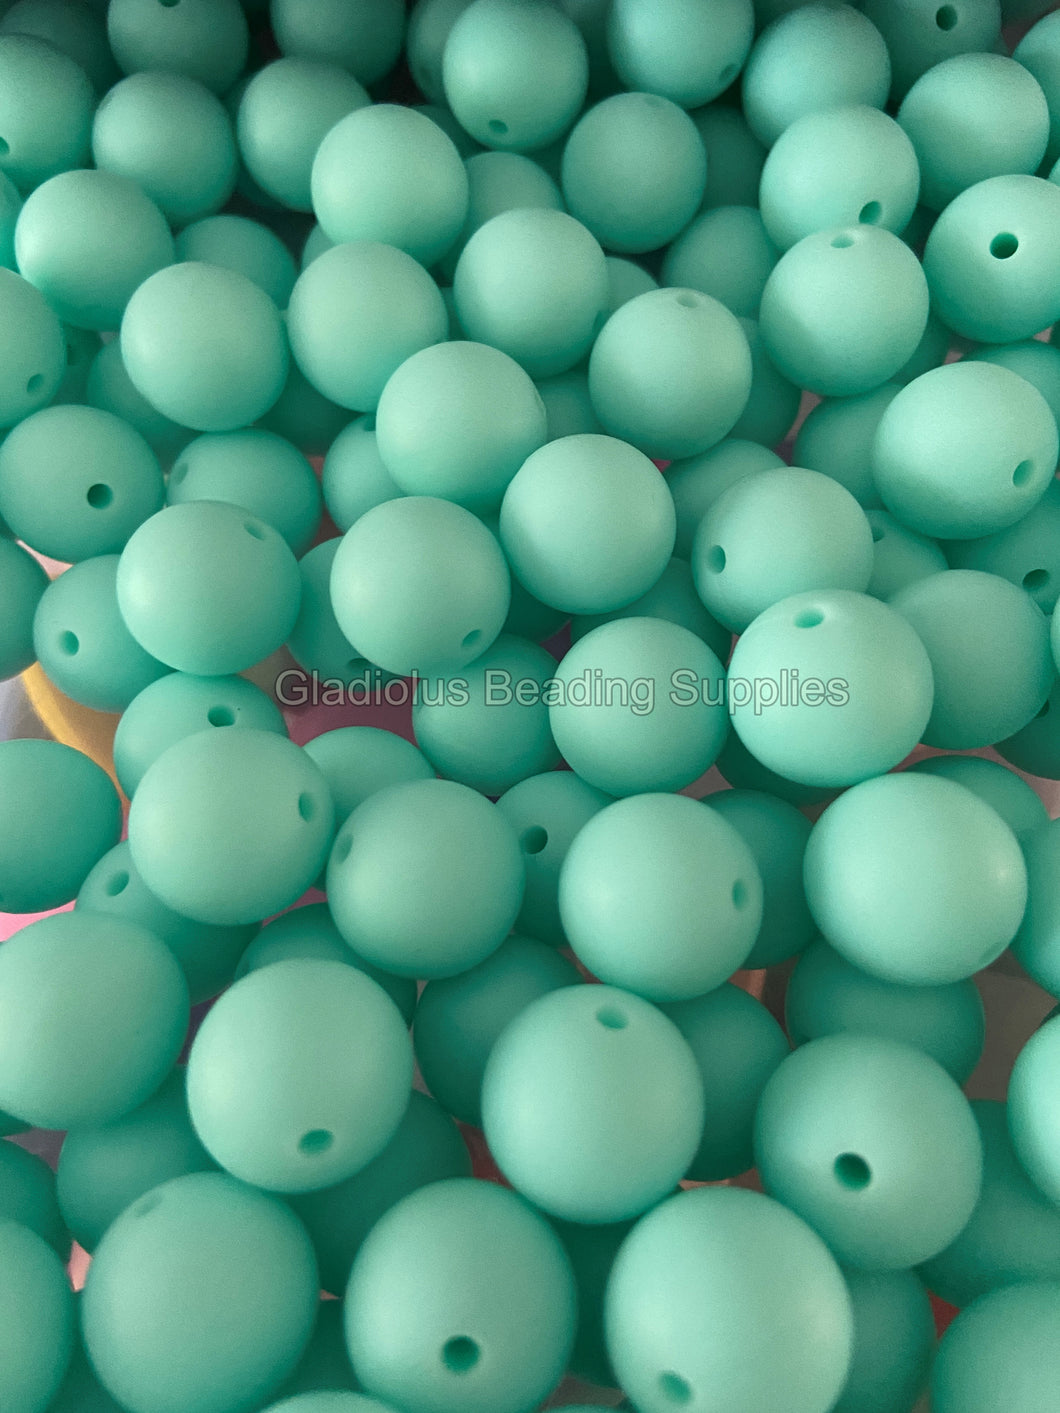 Blue Green Solid Color Beads, 12mm/15mm Round Silicone Bead, Teething Beads, BPA Free, Loose Beads